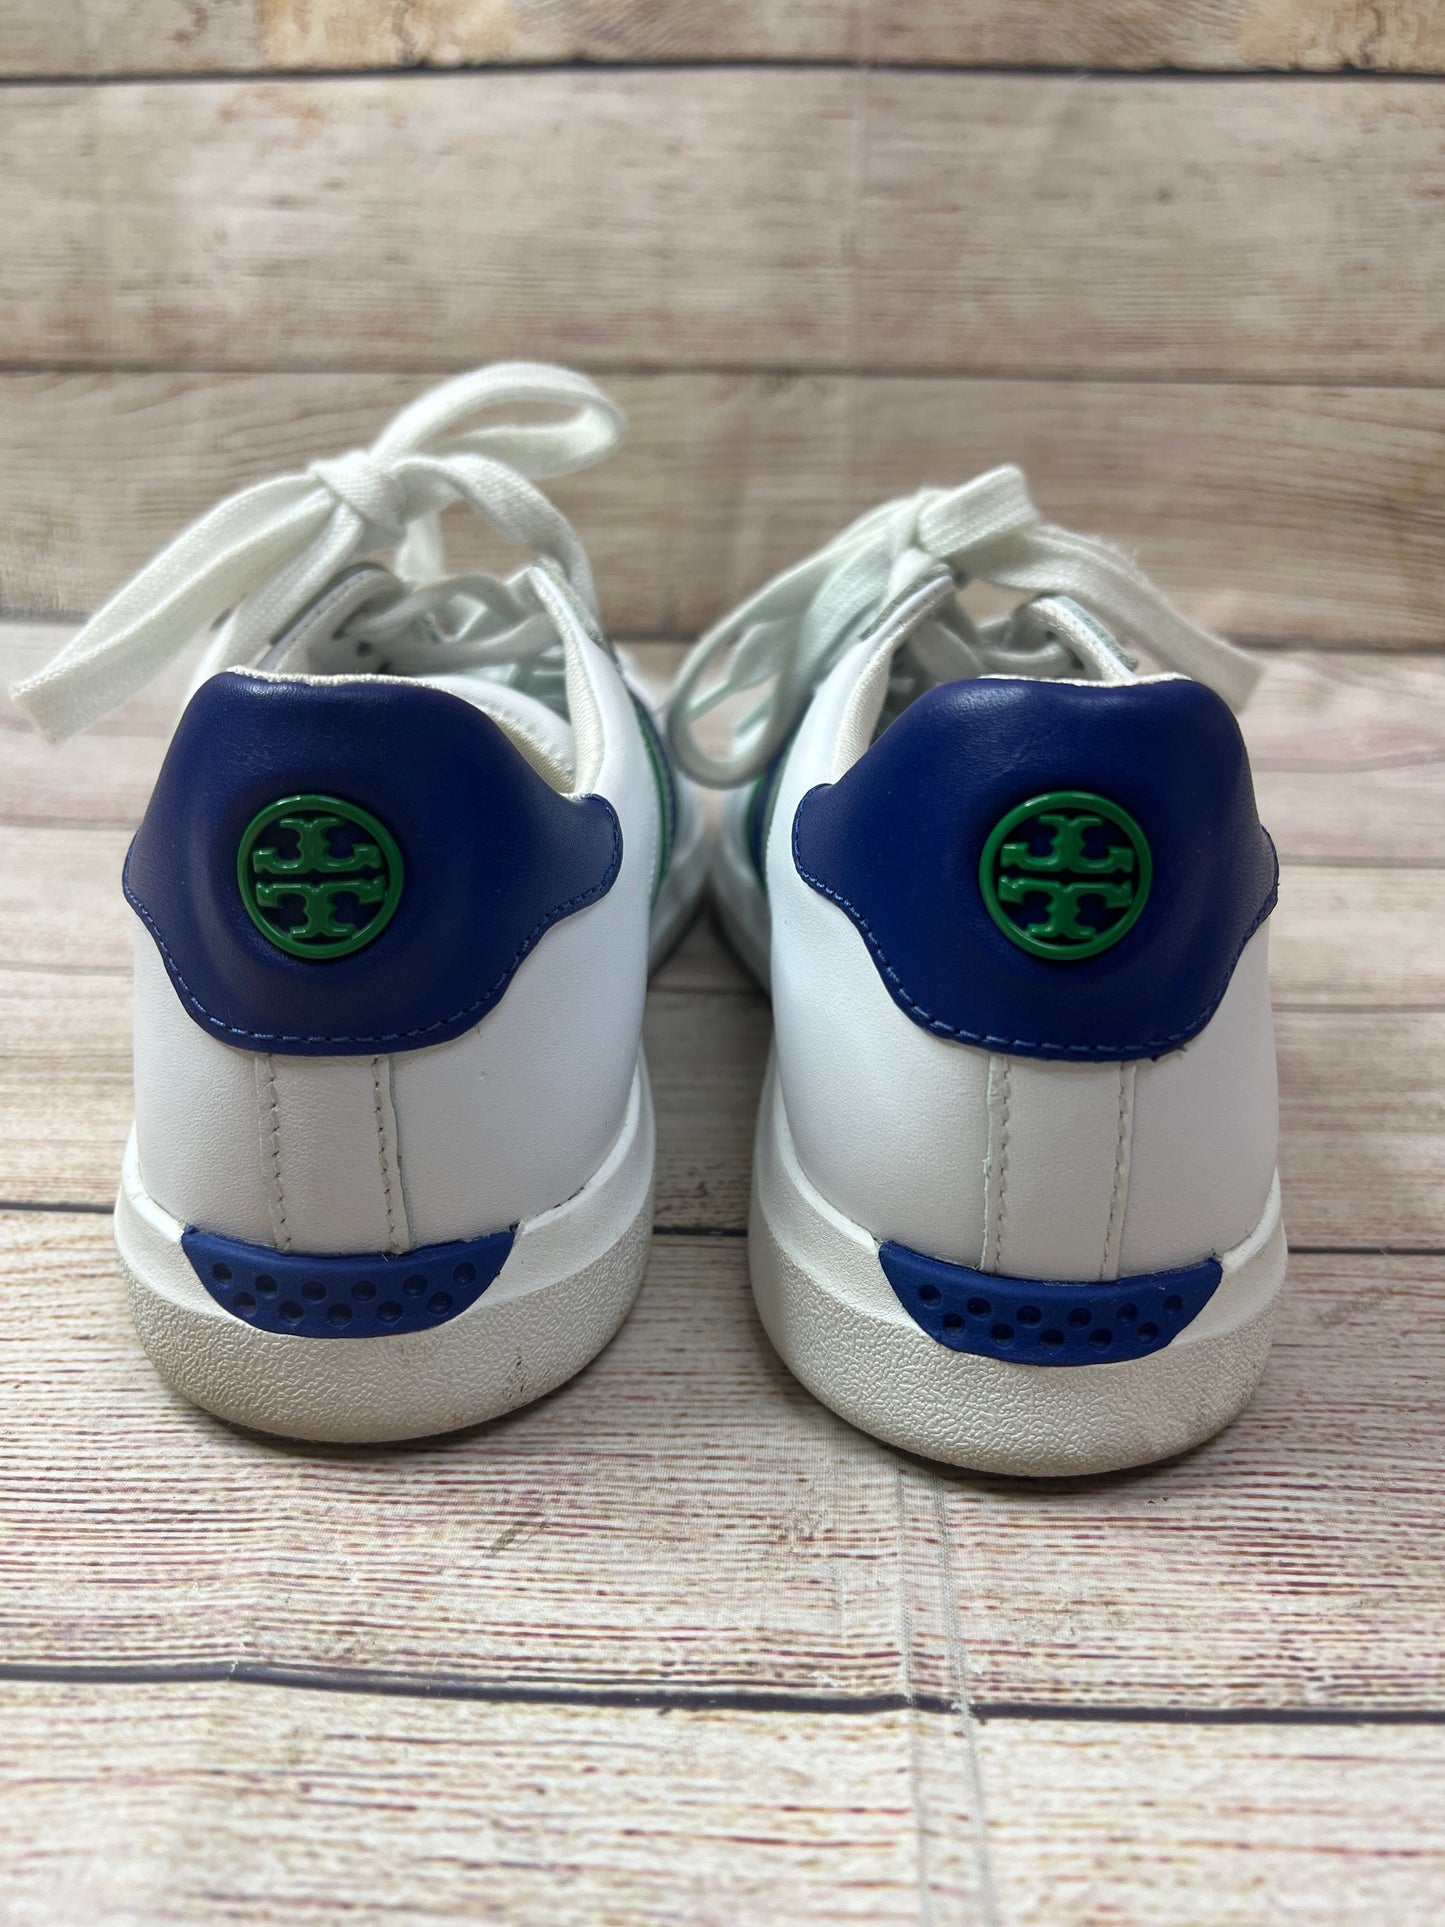 White Shoes Sneakers Tory Burch, Size 8.5